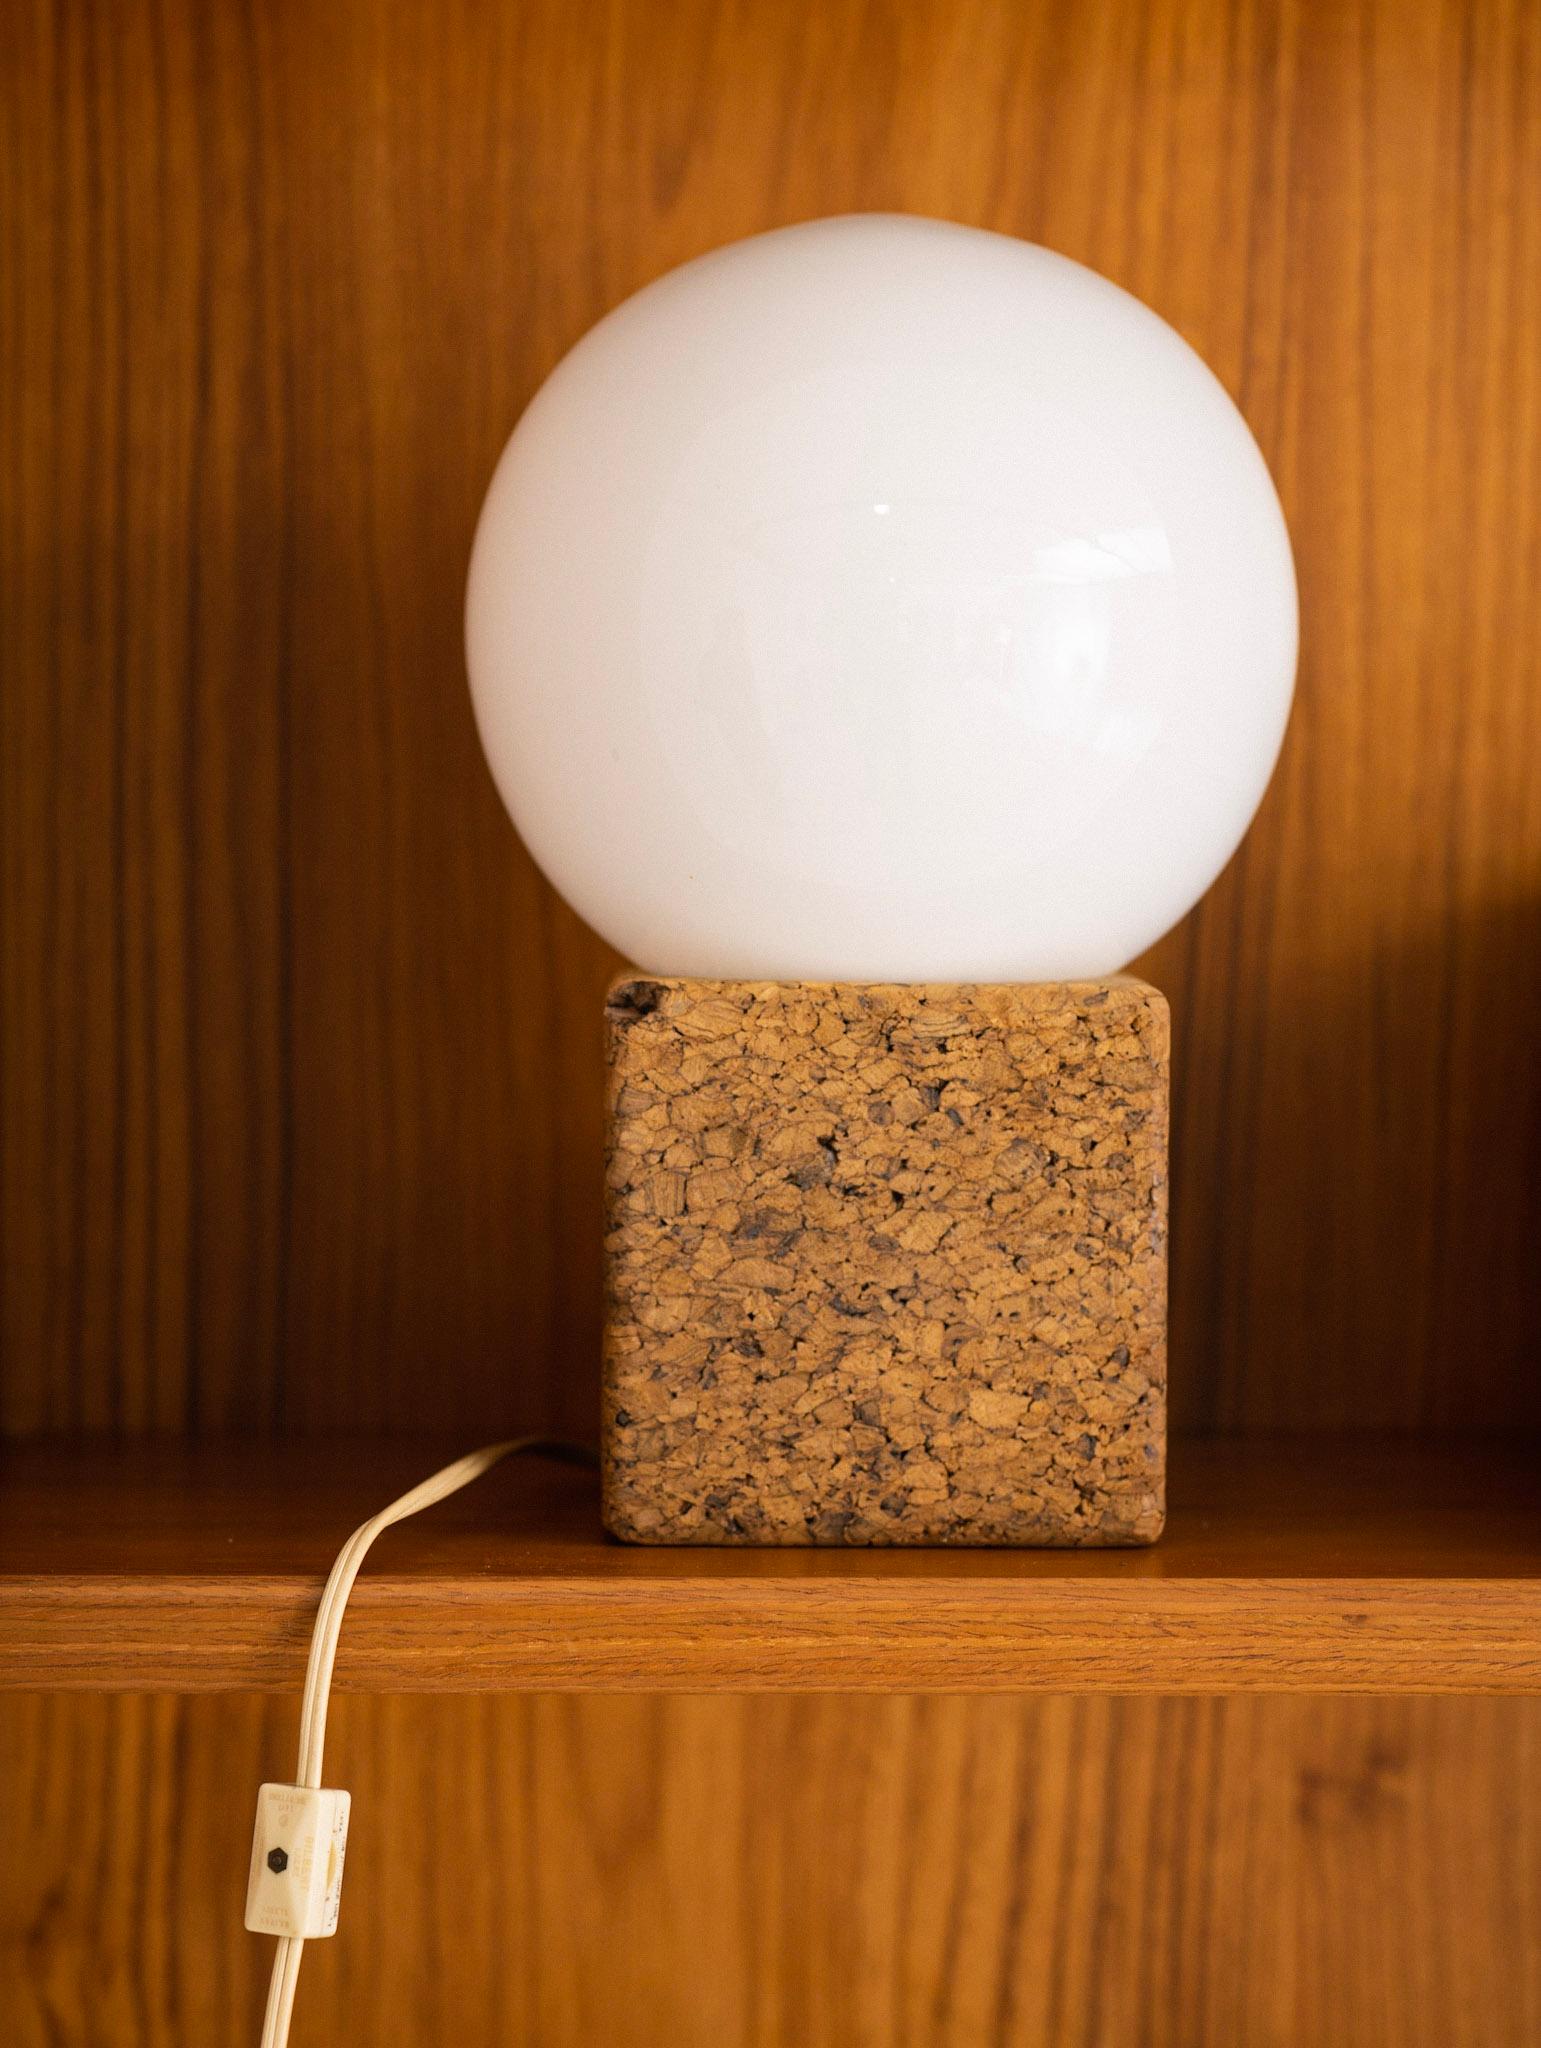 Mid century cork desk lamp with white glass globe. Glass globe simply rests on cork base. Cork base measures 5” x 5” x 5”.